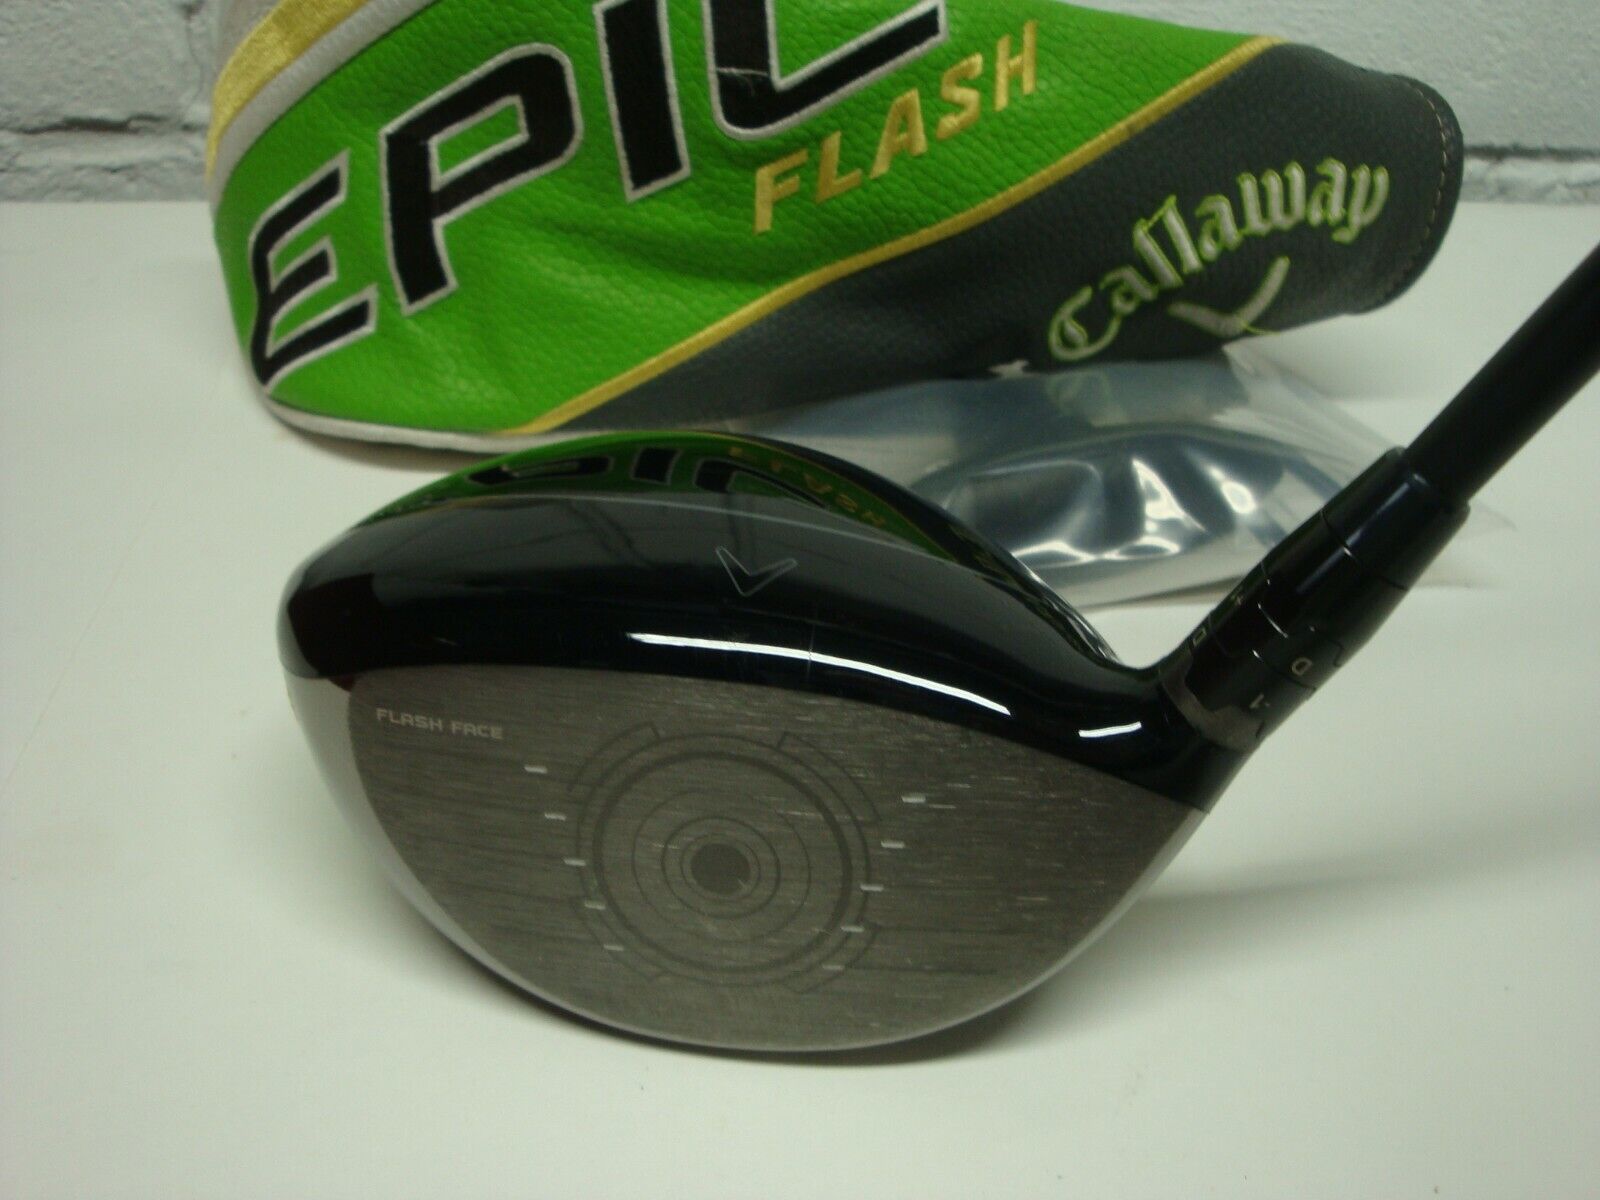 CALLAWAY EPIC FLASH SUB ZERO 9*driver TOUR ISSUE Handcrafted HZRDUS BLK 62S+$250